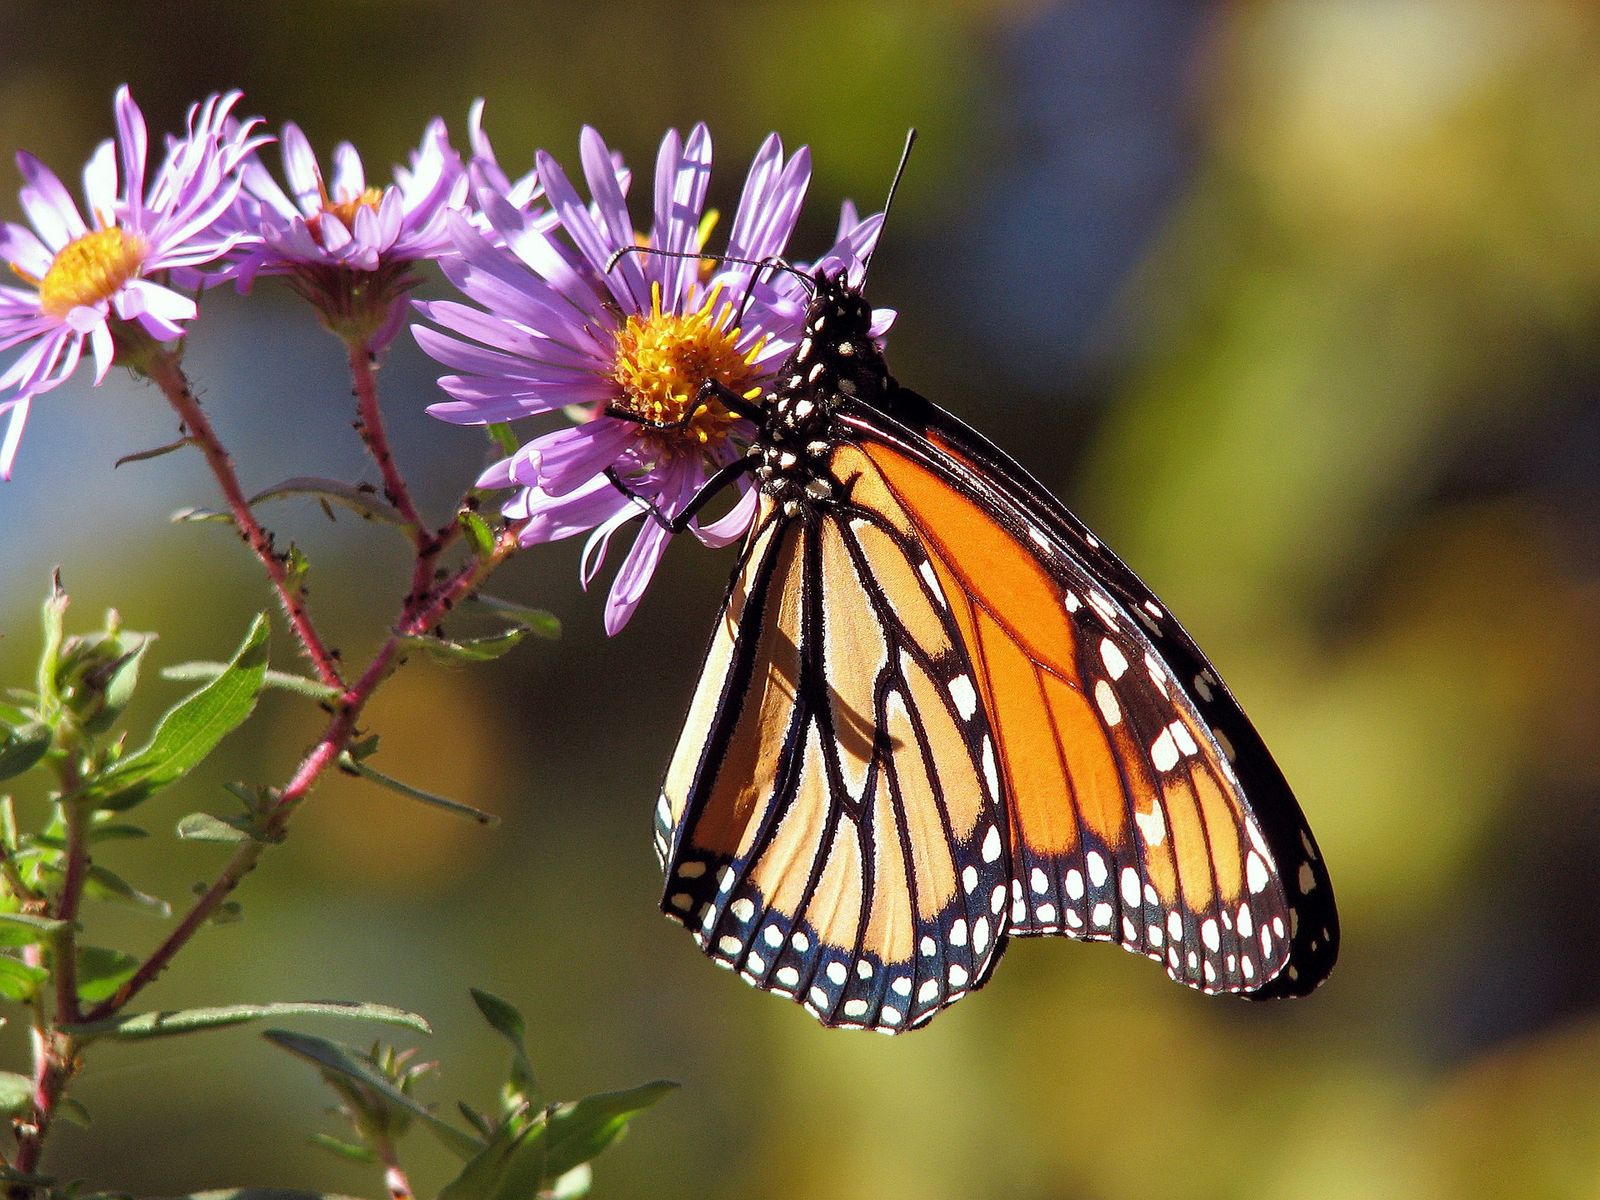 Migratory Monarch Butterflies Are Listed as an Endangered Species | Sensible Information